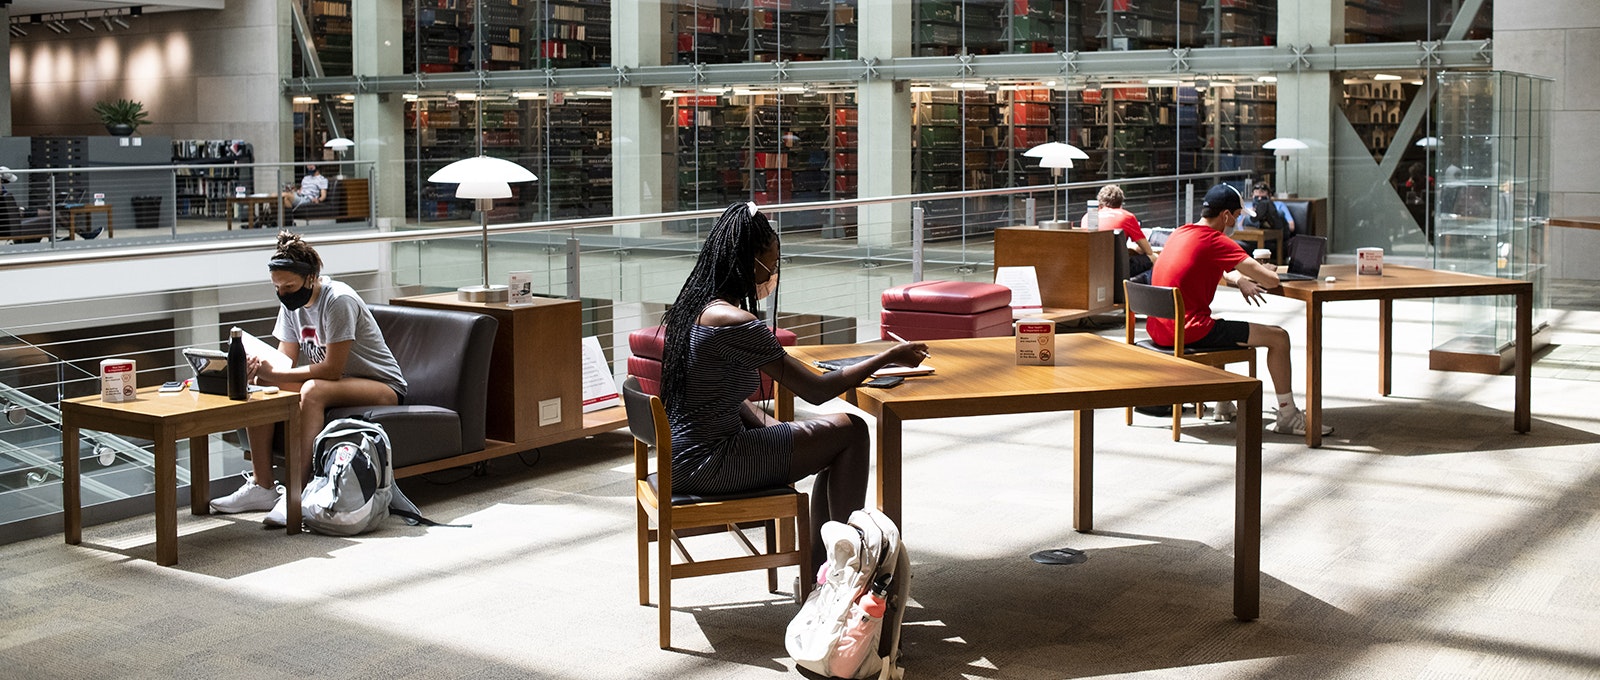 Students wearing protective masks study inside of the Thompson Library on the first day of classes at Ohio State University.